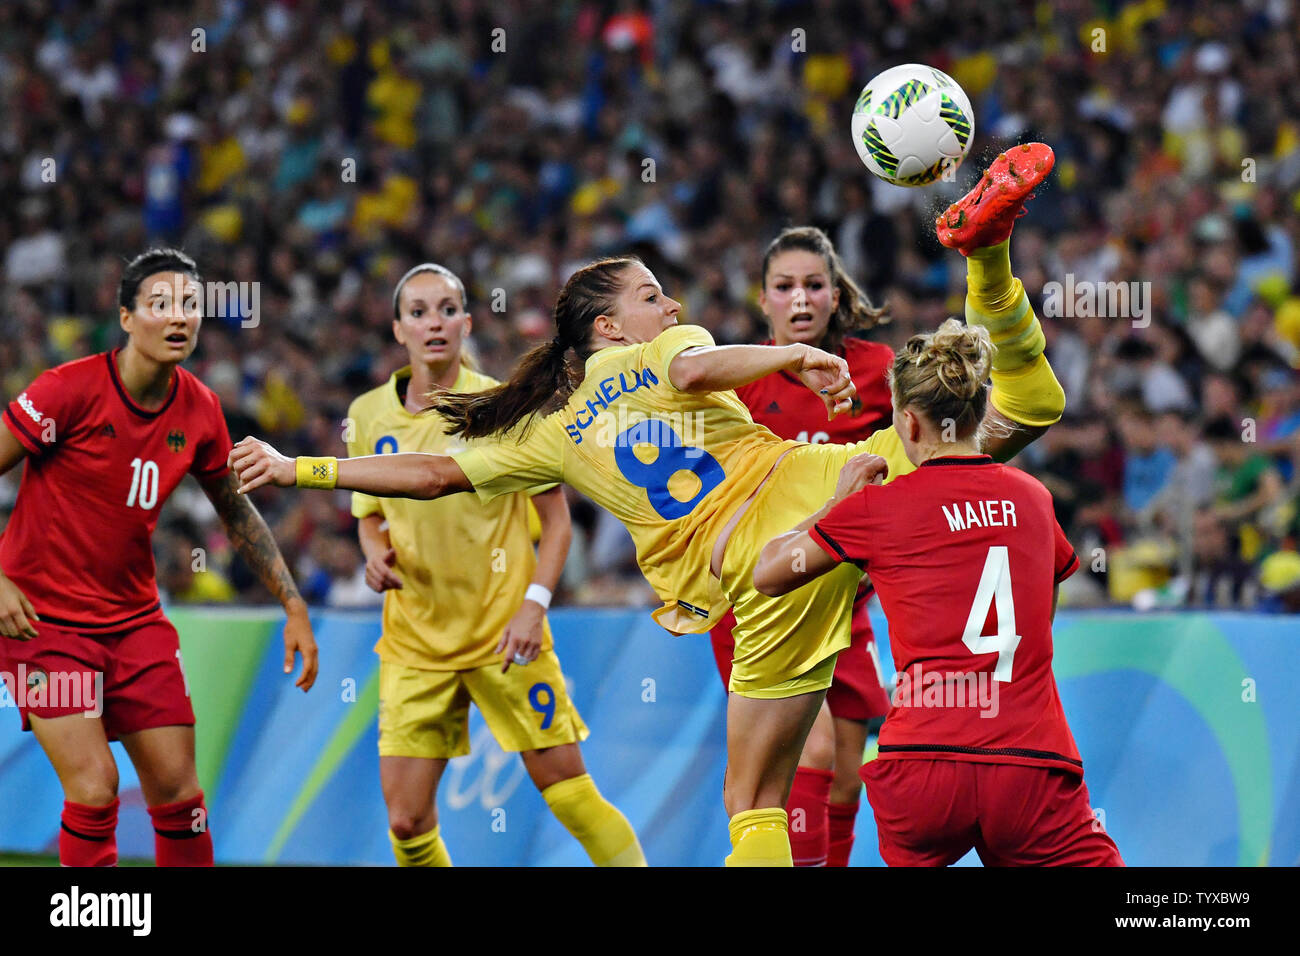 Lotta Schelin (8) of Sweden high kicks the ball away from Leonie Maier (4) of Germany during play in the Women's Football gold medal match in the Maracana Stadium at the 2016 Rio Summer Olympics in Rio de Janeiro, Brazil, on August 19, 2016. Germany won the gold medal 2-1 and Sweden the silver.        Photo by Richard Ellis/UPI Stock Photo